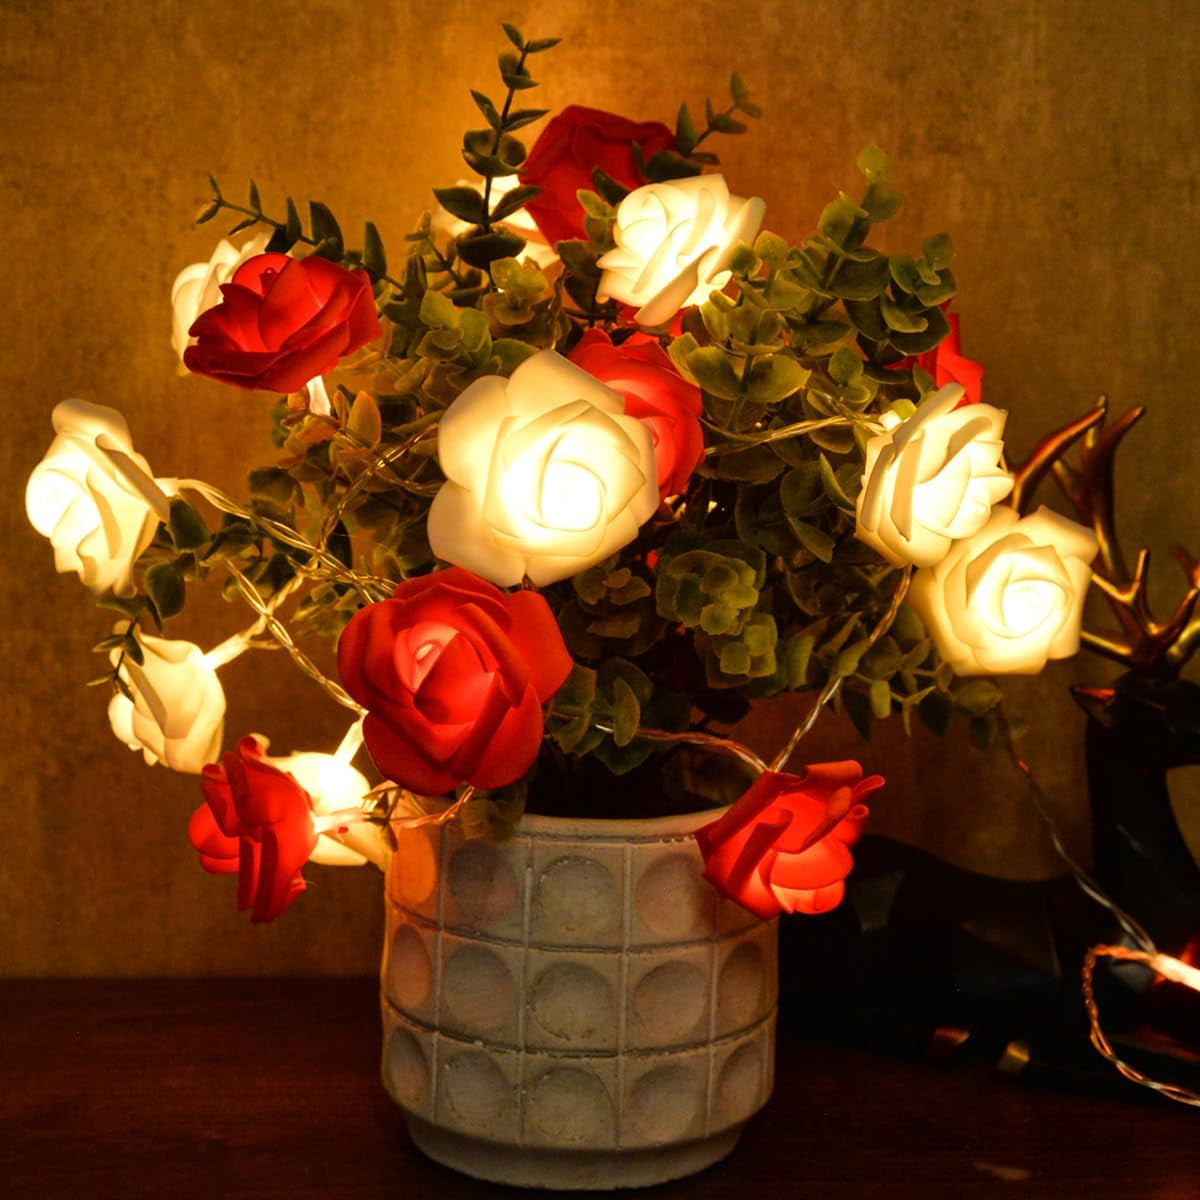 Valentines Day Decor - 10Ft Red and White Rose Lights, 20 LED Battery Operated String Lights for Anniversary, Engagement, Wedding, Birthday - Romantic Home Room Decorations